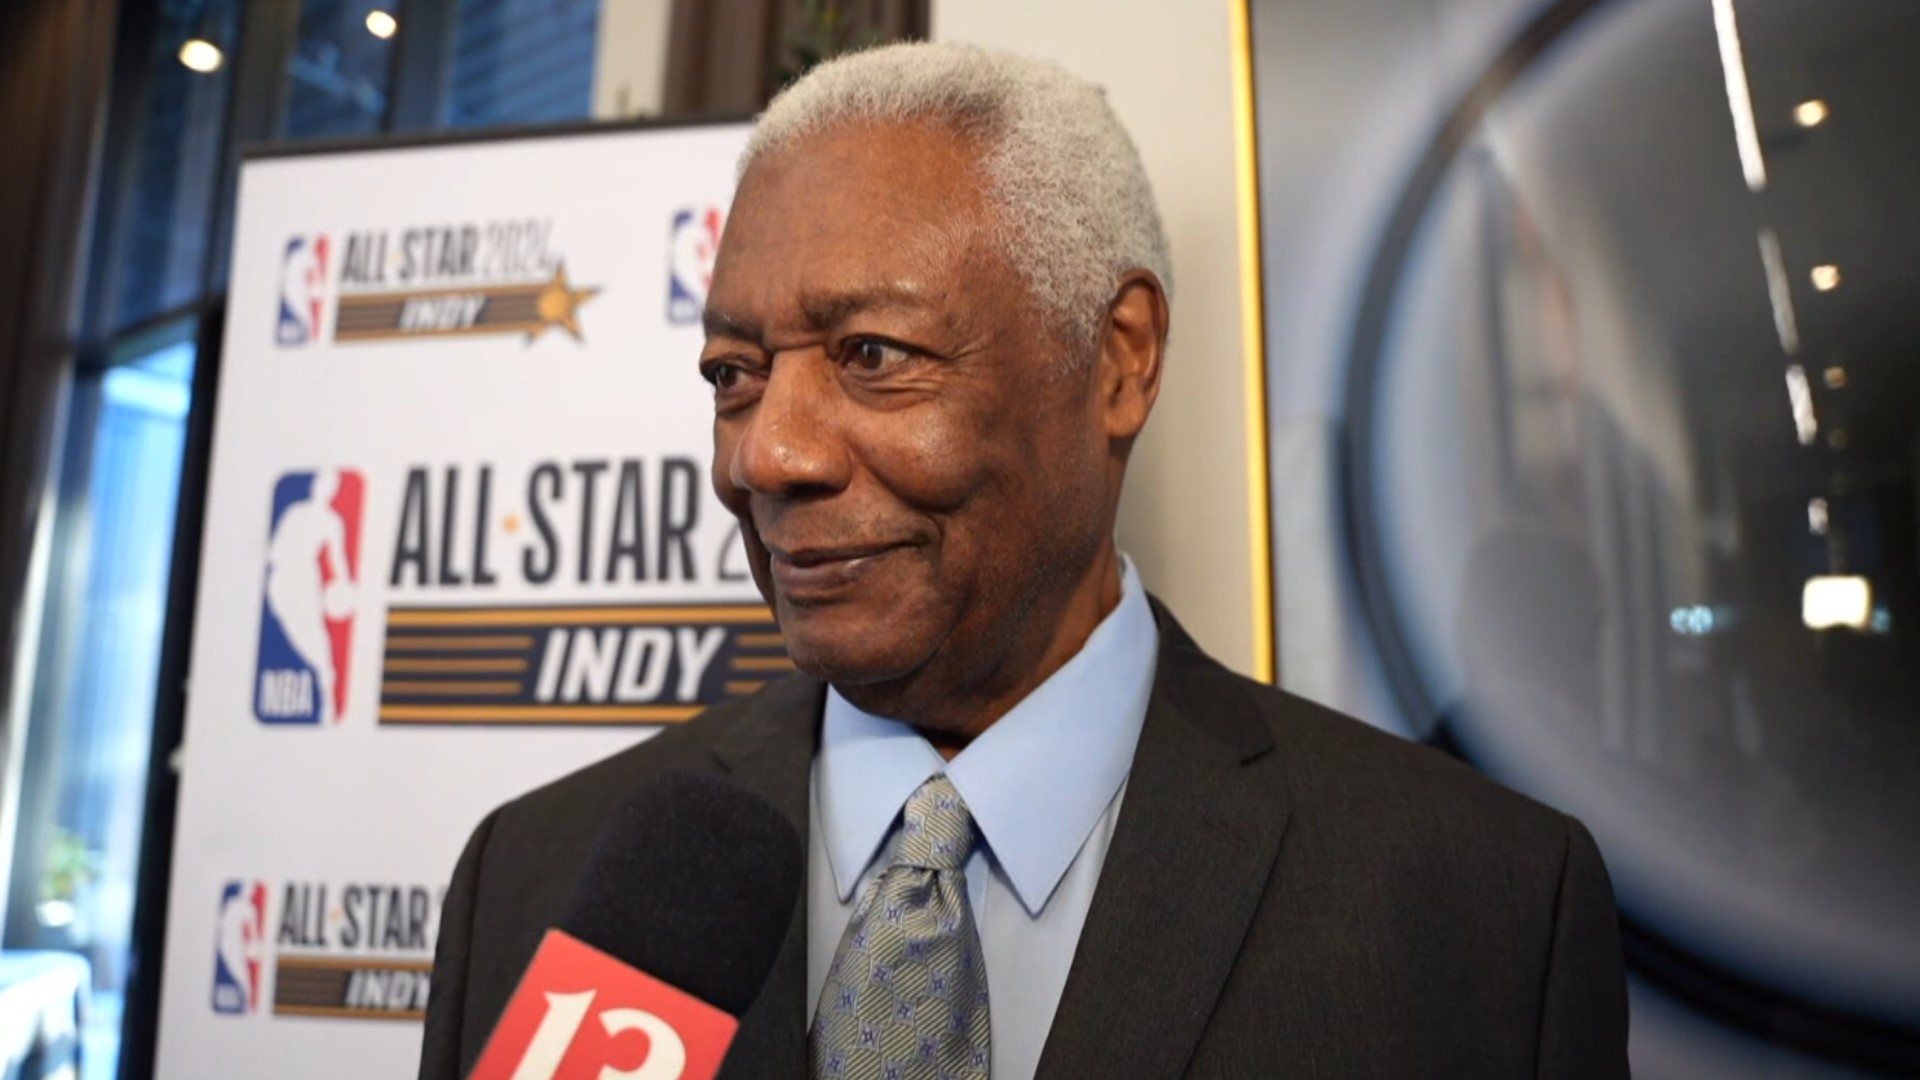 13Sports director Dave Calabro interviews Indianapolis basketball legend Oscar Robertson during All-Star Weekend festivities.